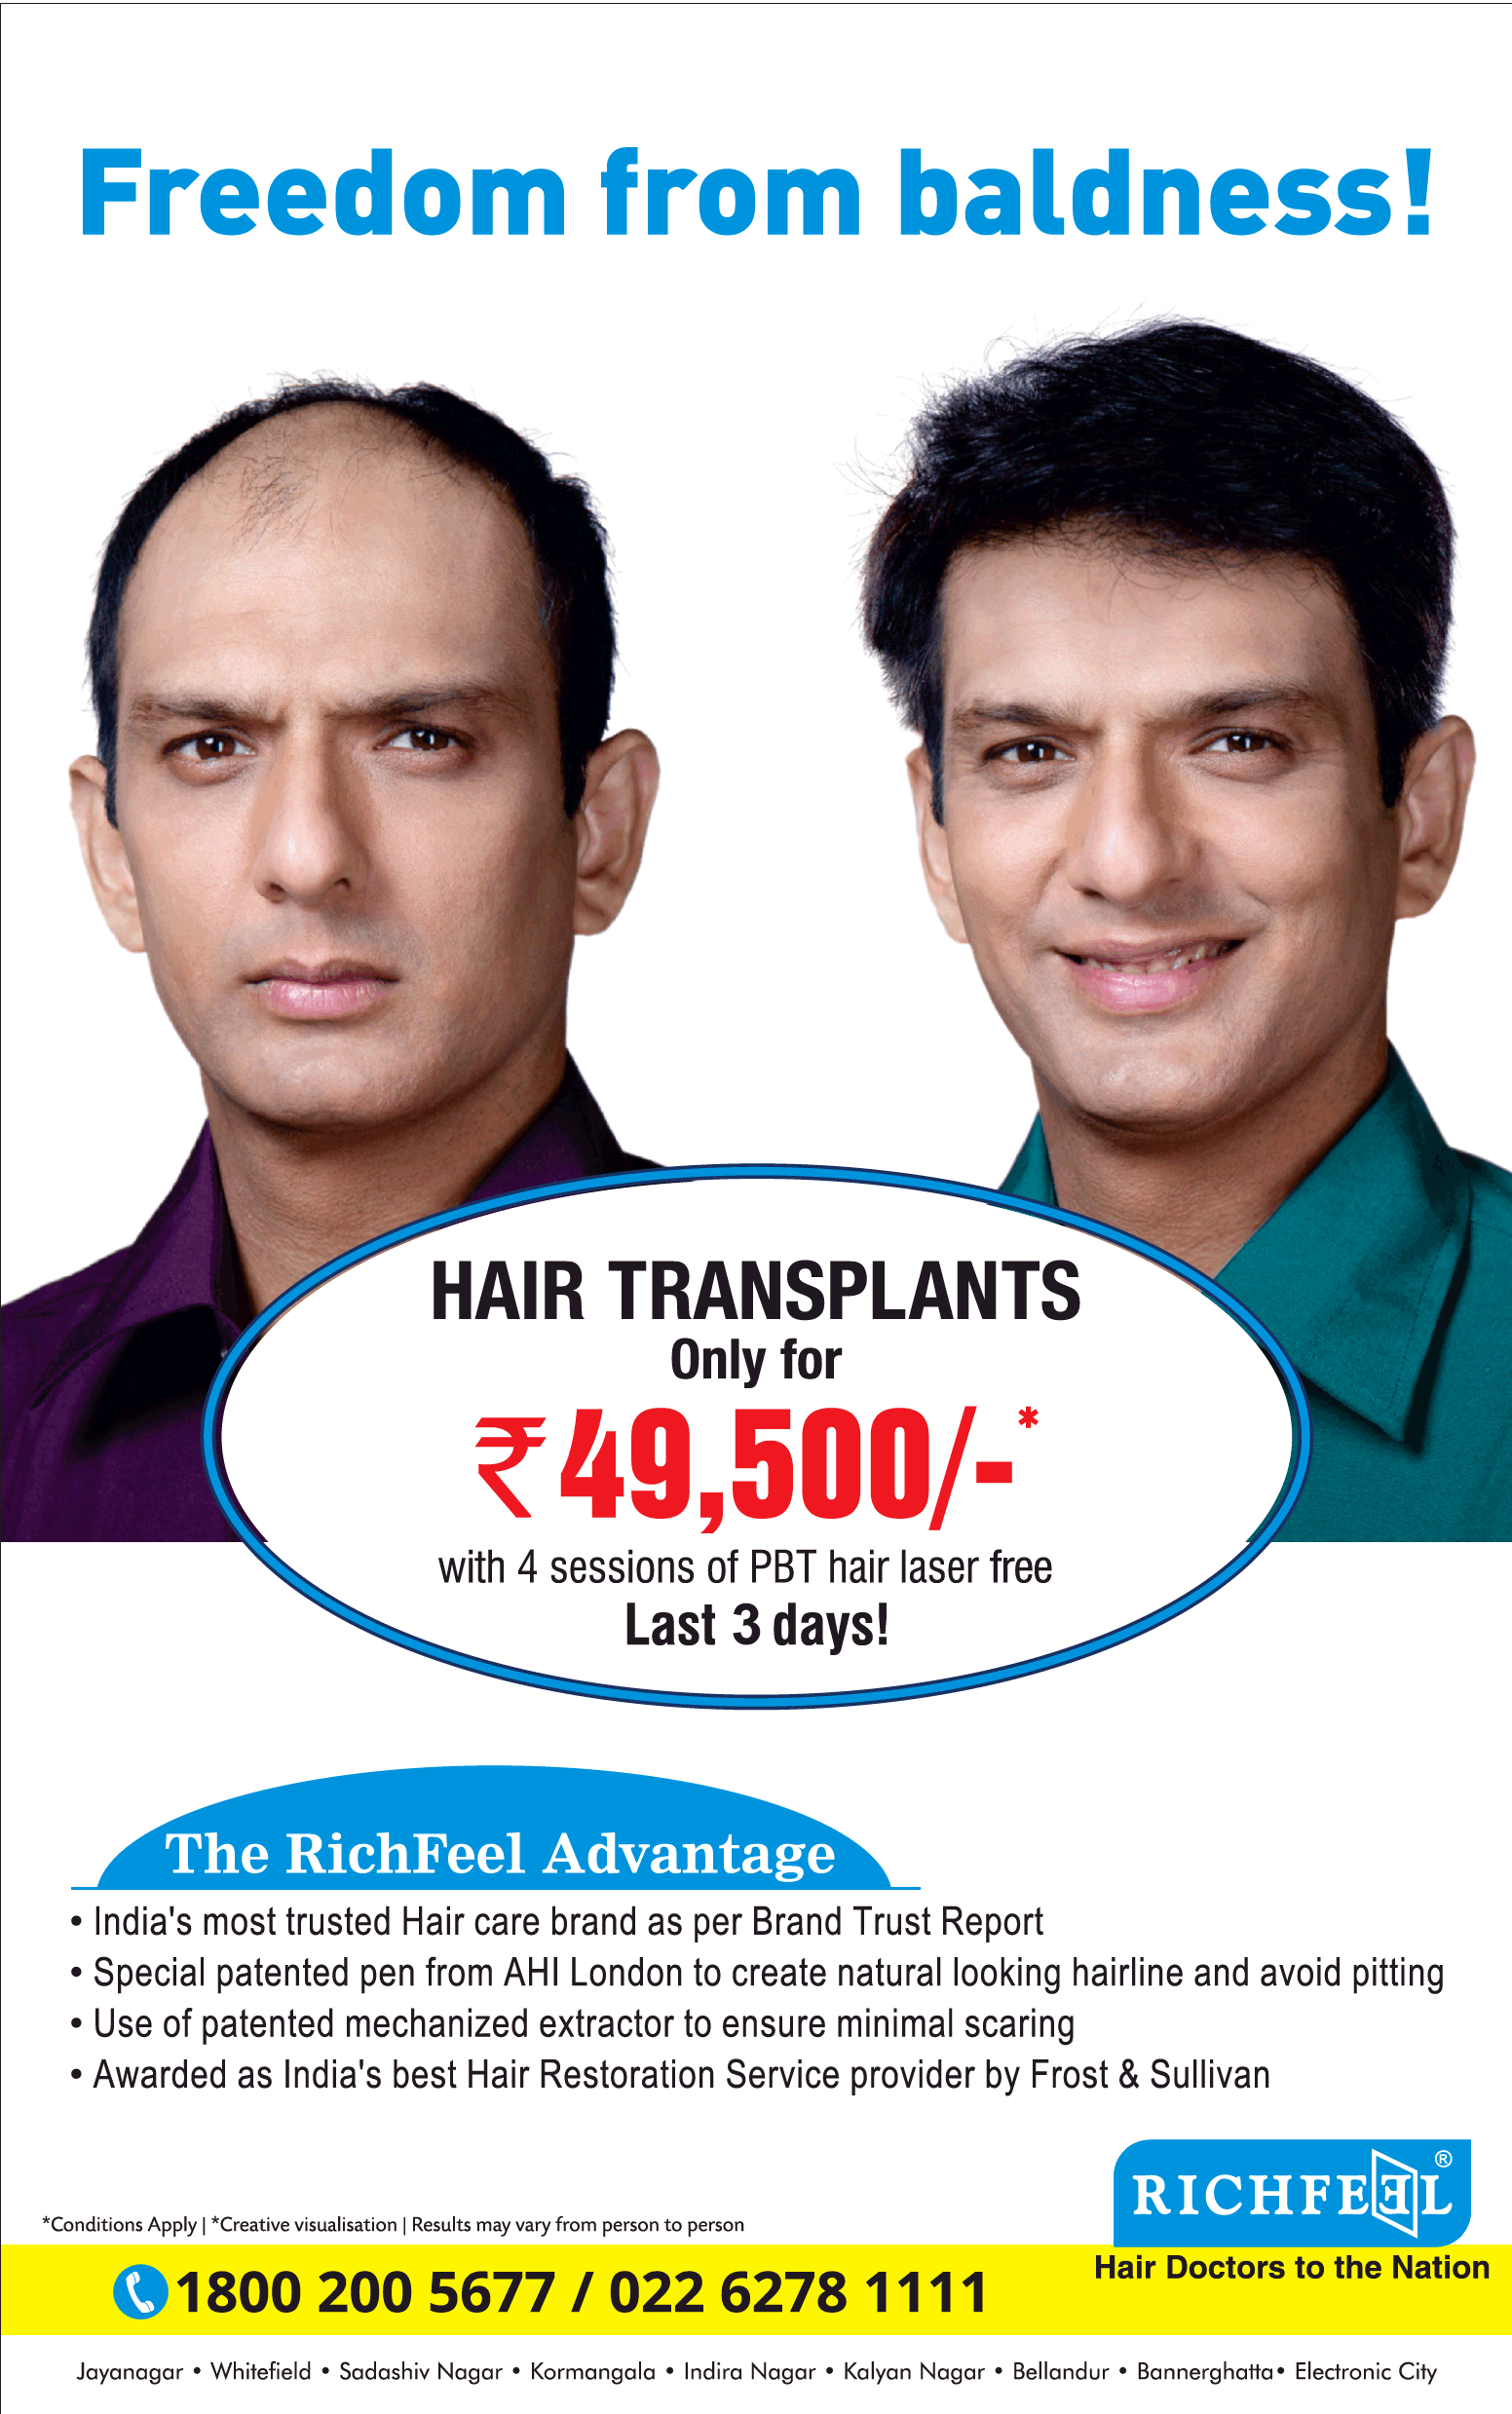 Richfeel Hair Doctors To Nation Freedom From Baldness Hair Transplants Only  For 49500 Ad - Advert Gallery